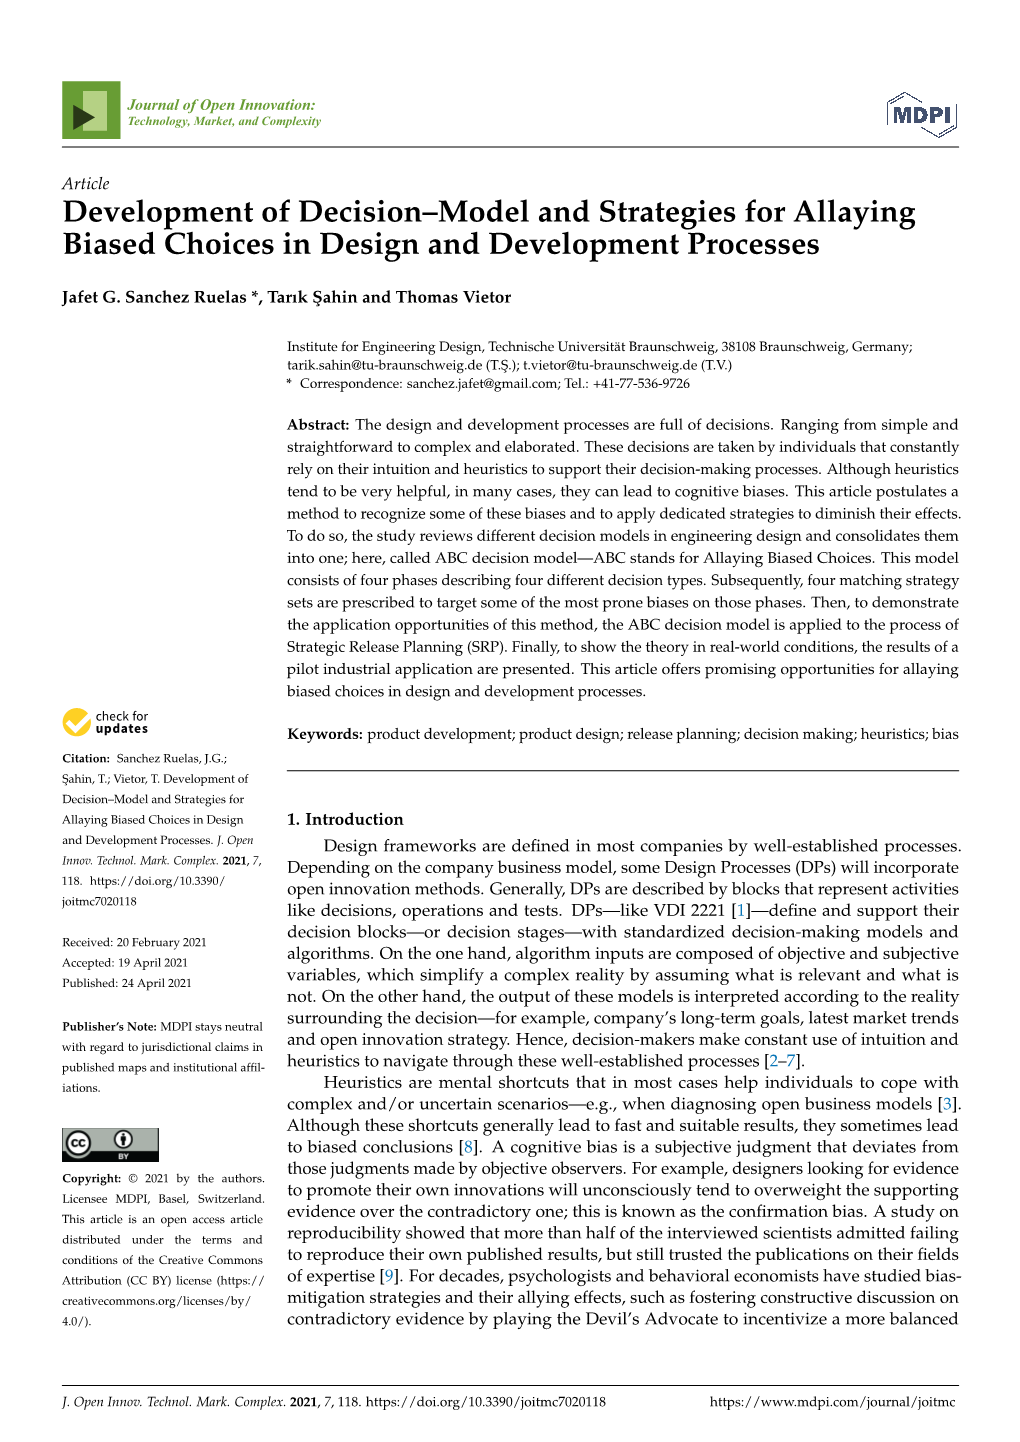 Development of Decision–Model and Strategies for Allaying Biased Choices in Design and Development Processes